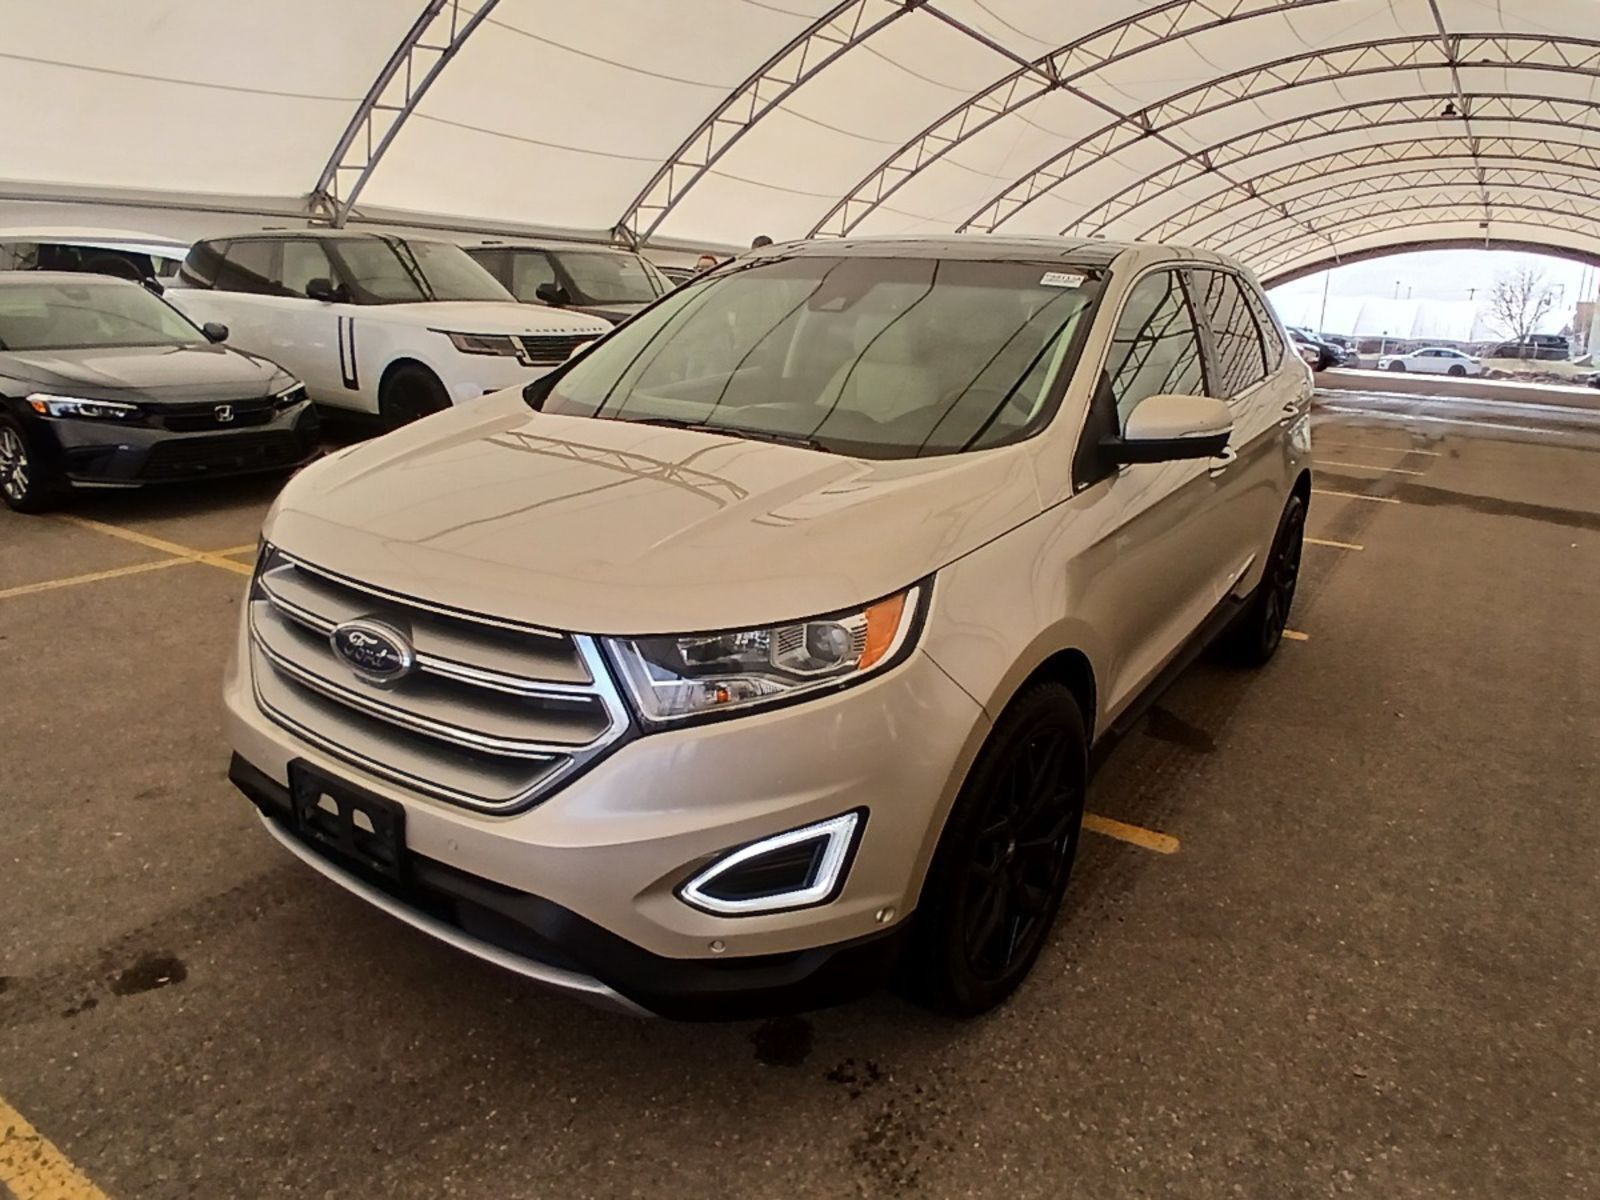 2018 Ford Edge Titanium - One Owner, Back Up Camera, Heated Seats